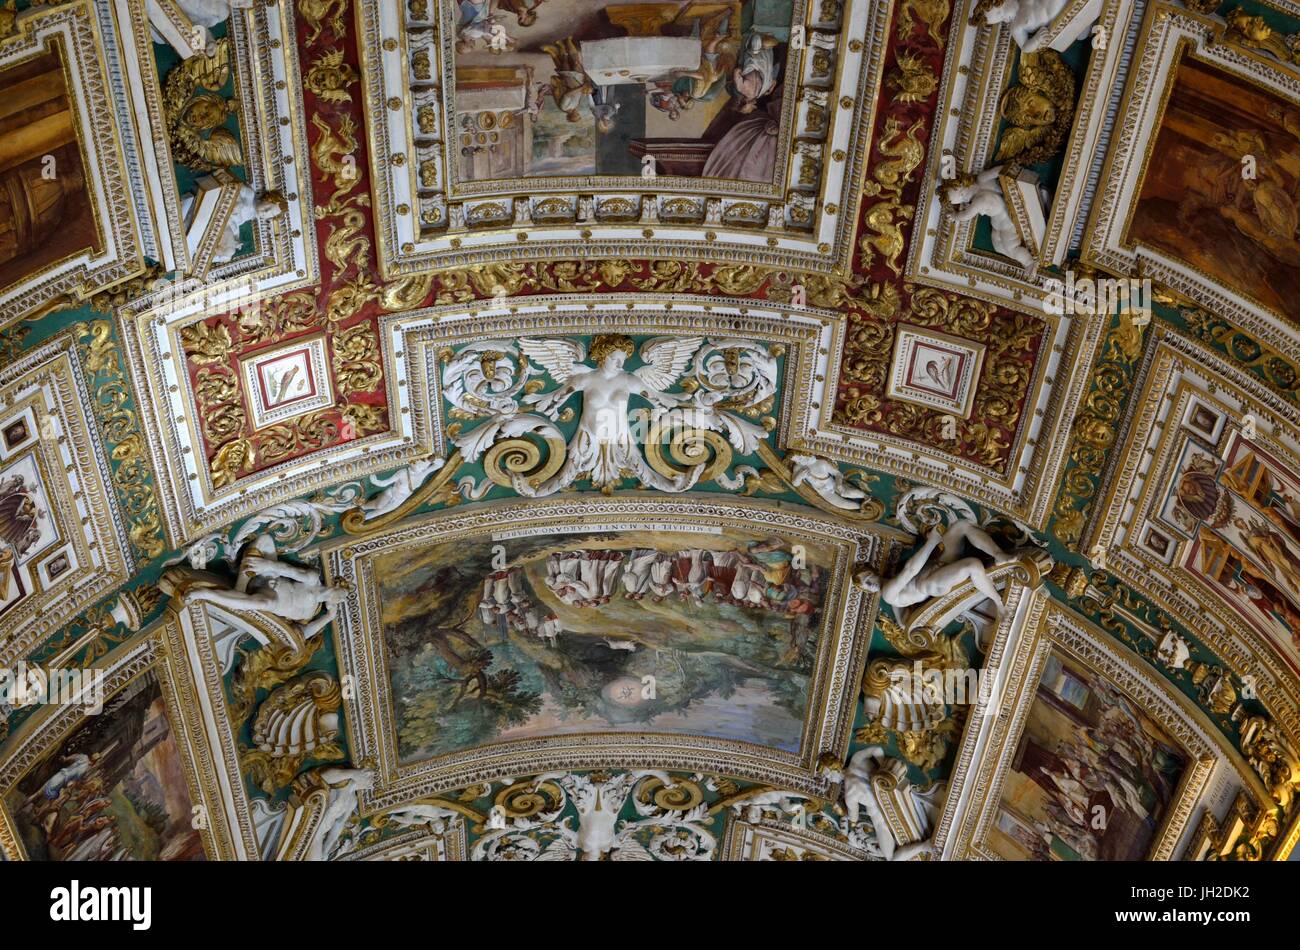 Renaissance period Paintings on the ceiling of St Peter's basilica in Vatican City, Rome, Italy Stock Photo